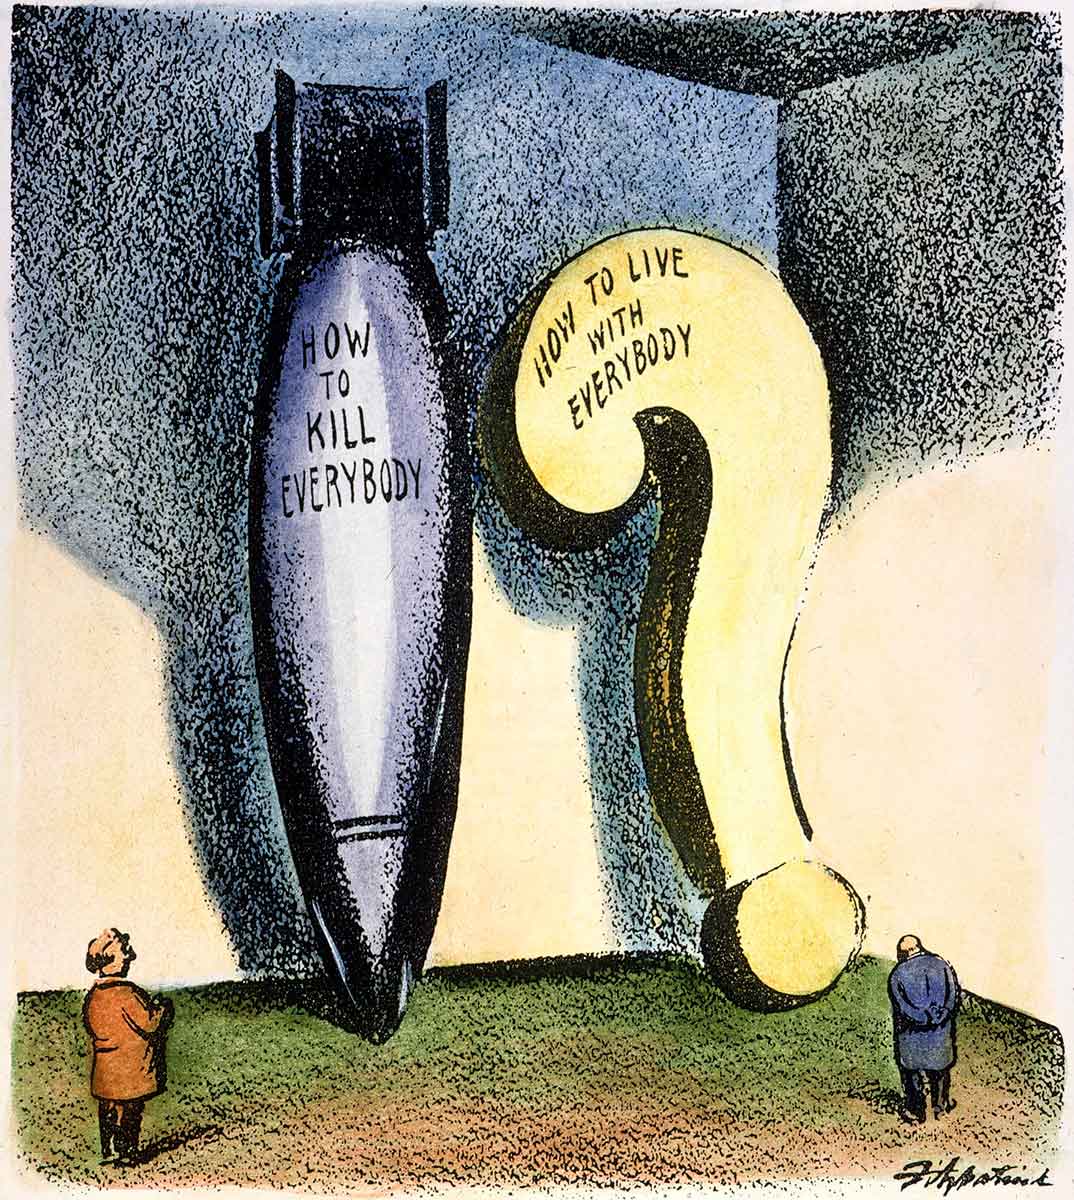 Cartoon depicting two men peering up at a giant bomb printed with the text 'HOW TO KILL EVERYBODY' and a giant question mark with the text 'HOW TO LIVE WITH EVERYBODY'.